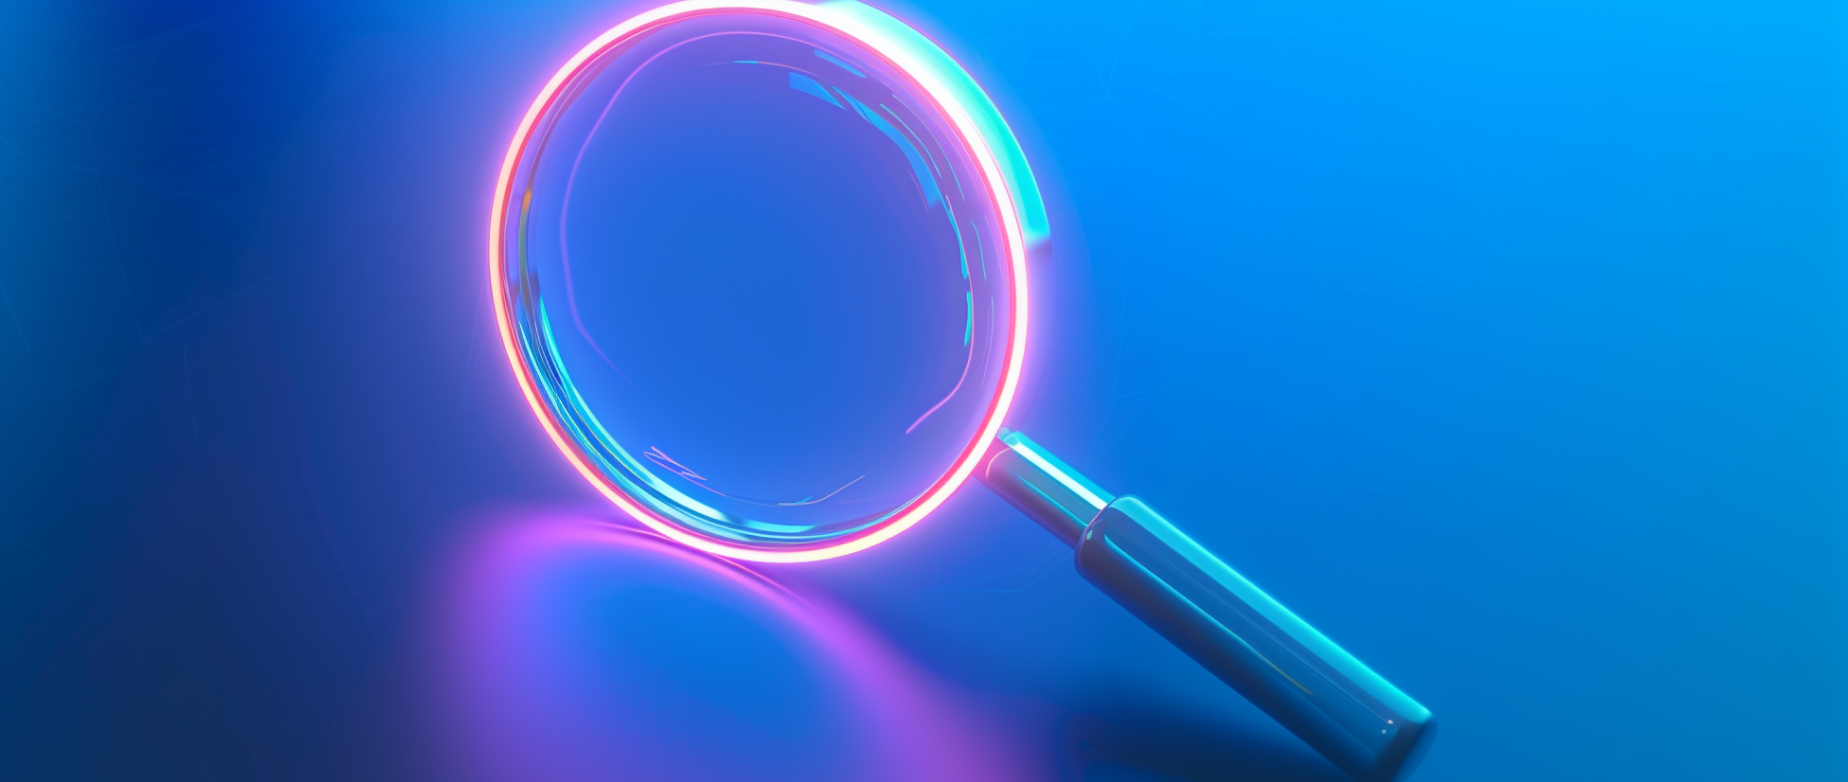 A magnifying glass with a pink rim on a dark blue background.